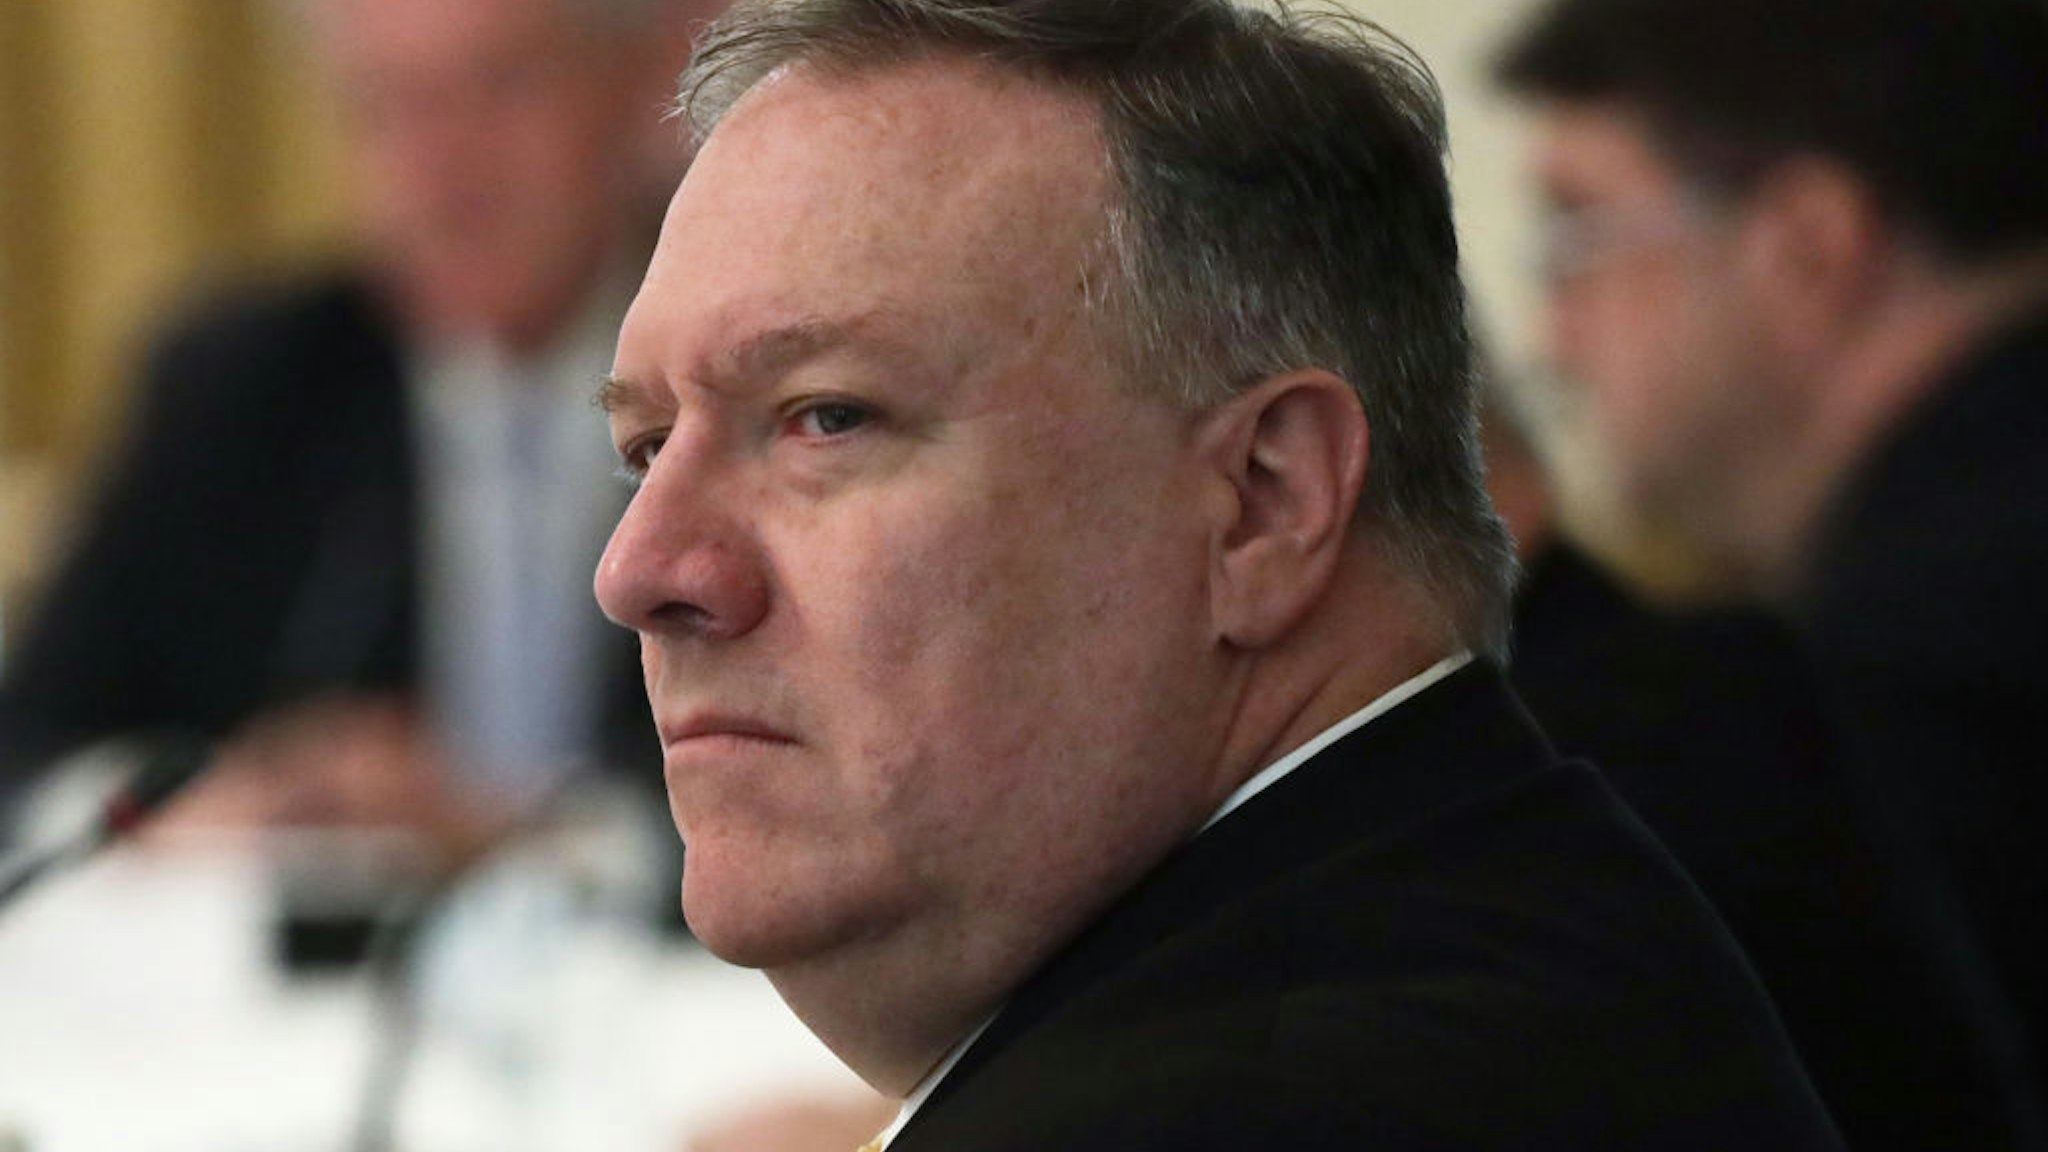 U.S. Secretary of State Mike Pompeo listens during a cabinet meeting in the East Room of the White House on May 19, 2020